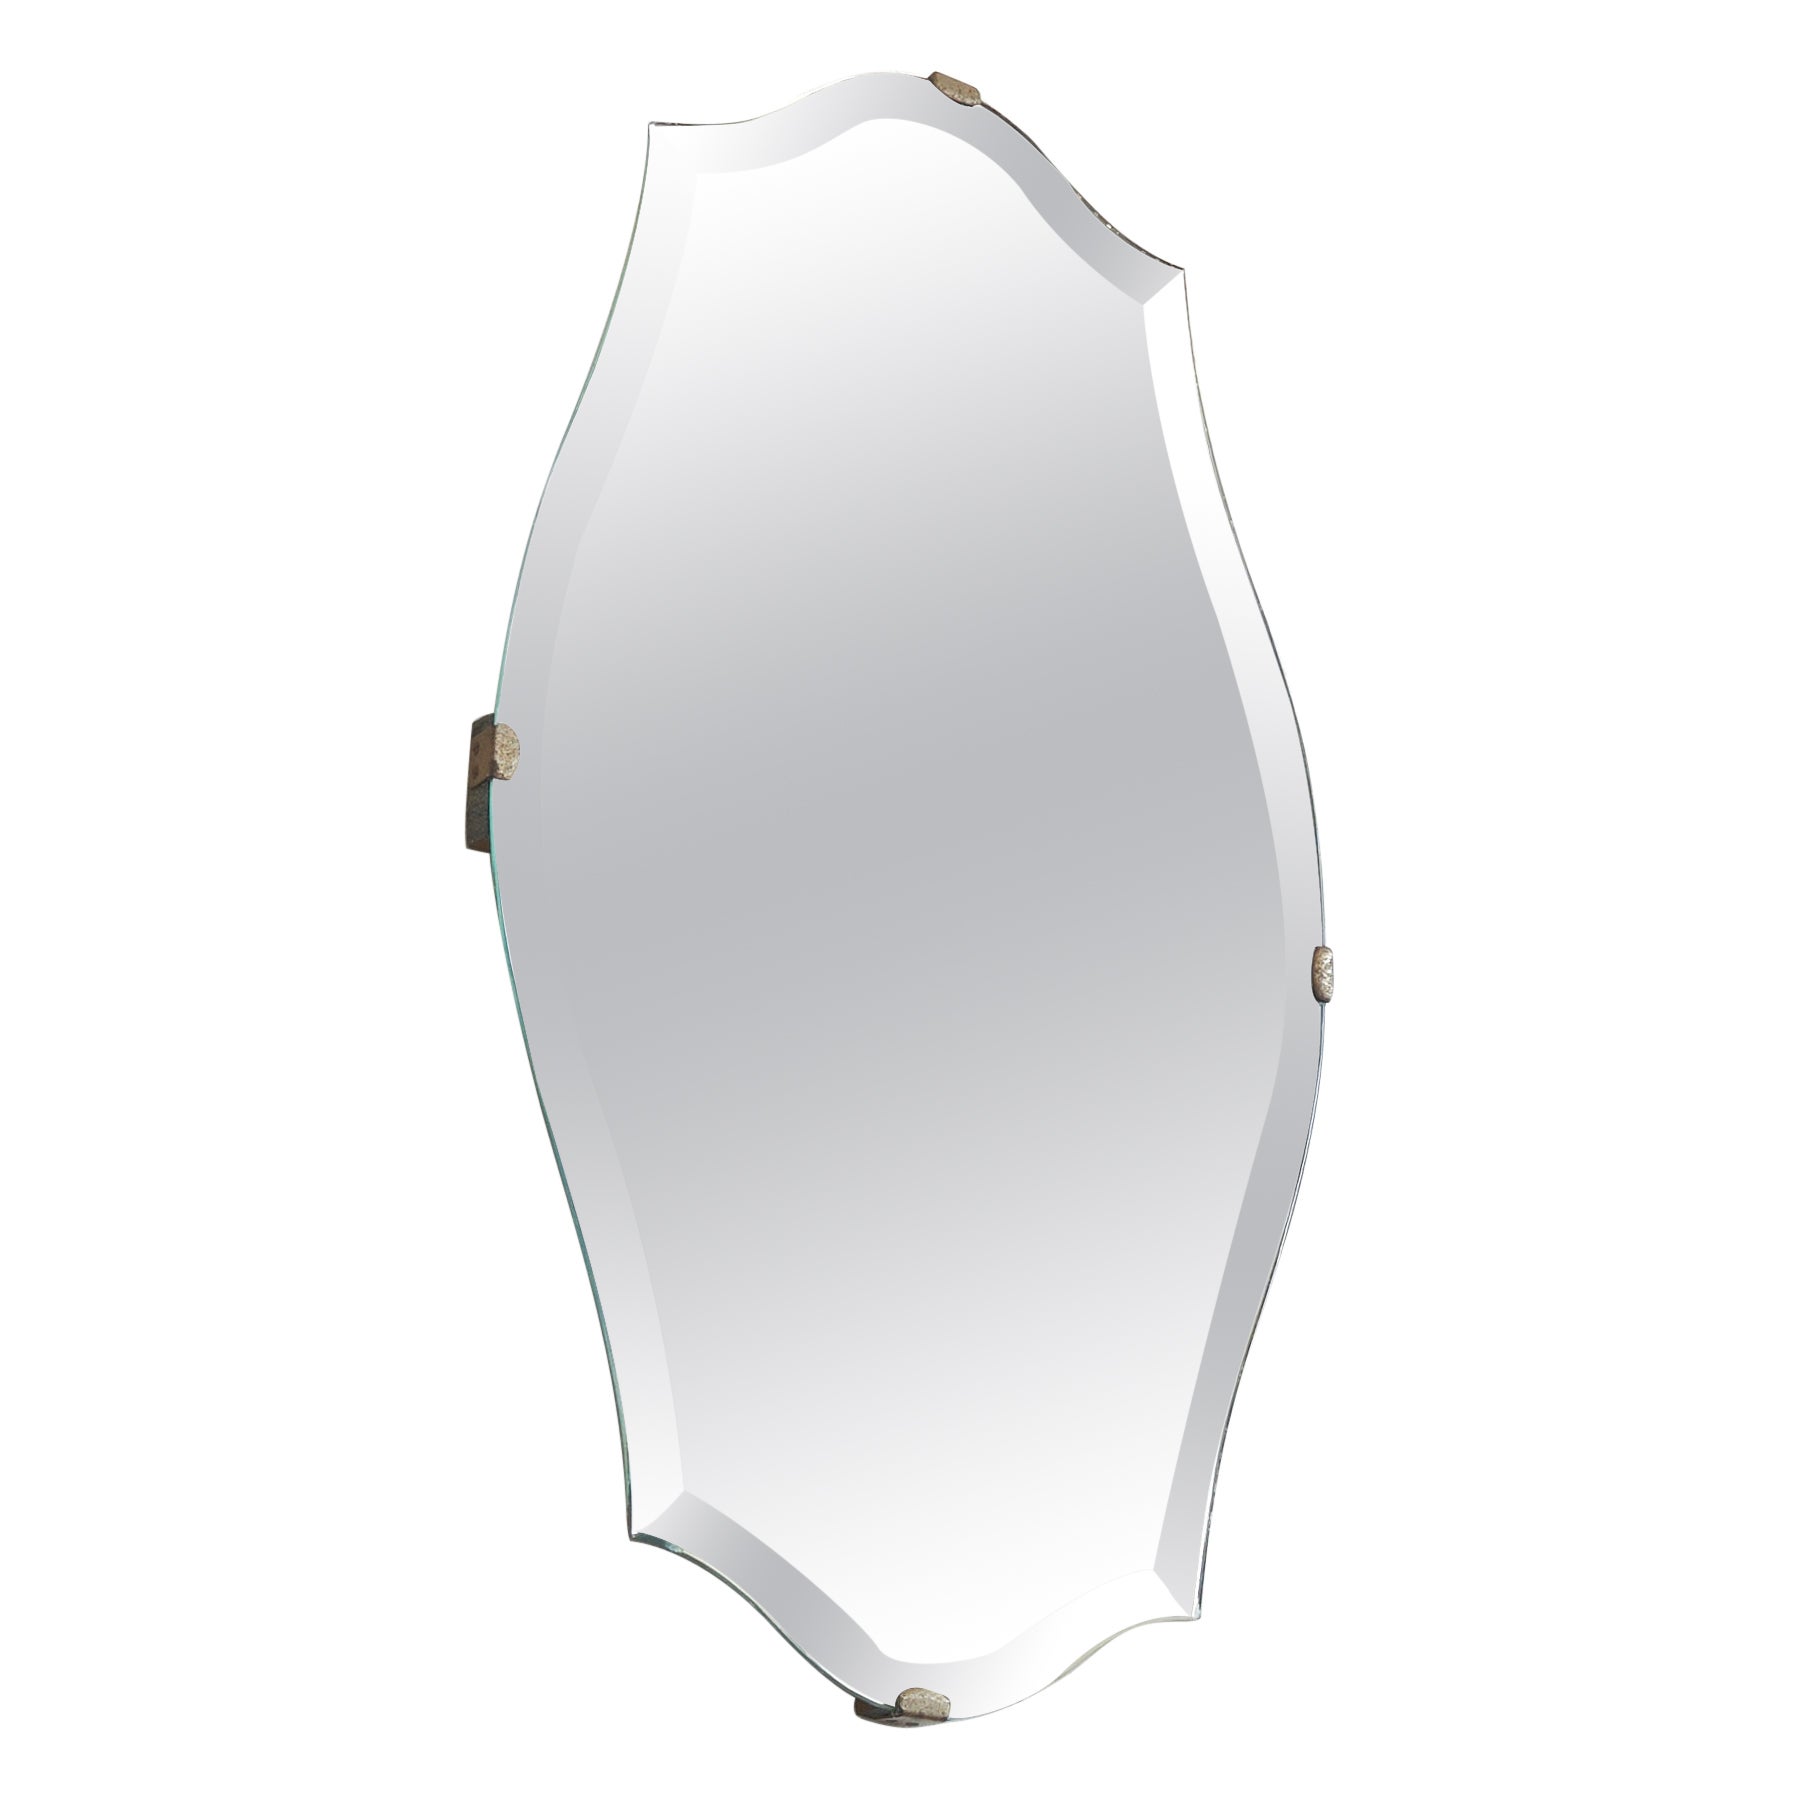 Art Deco Shield Mirror in Facetted and Patinated Mirror Glass, 1940s For Sale